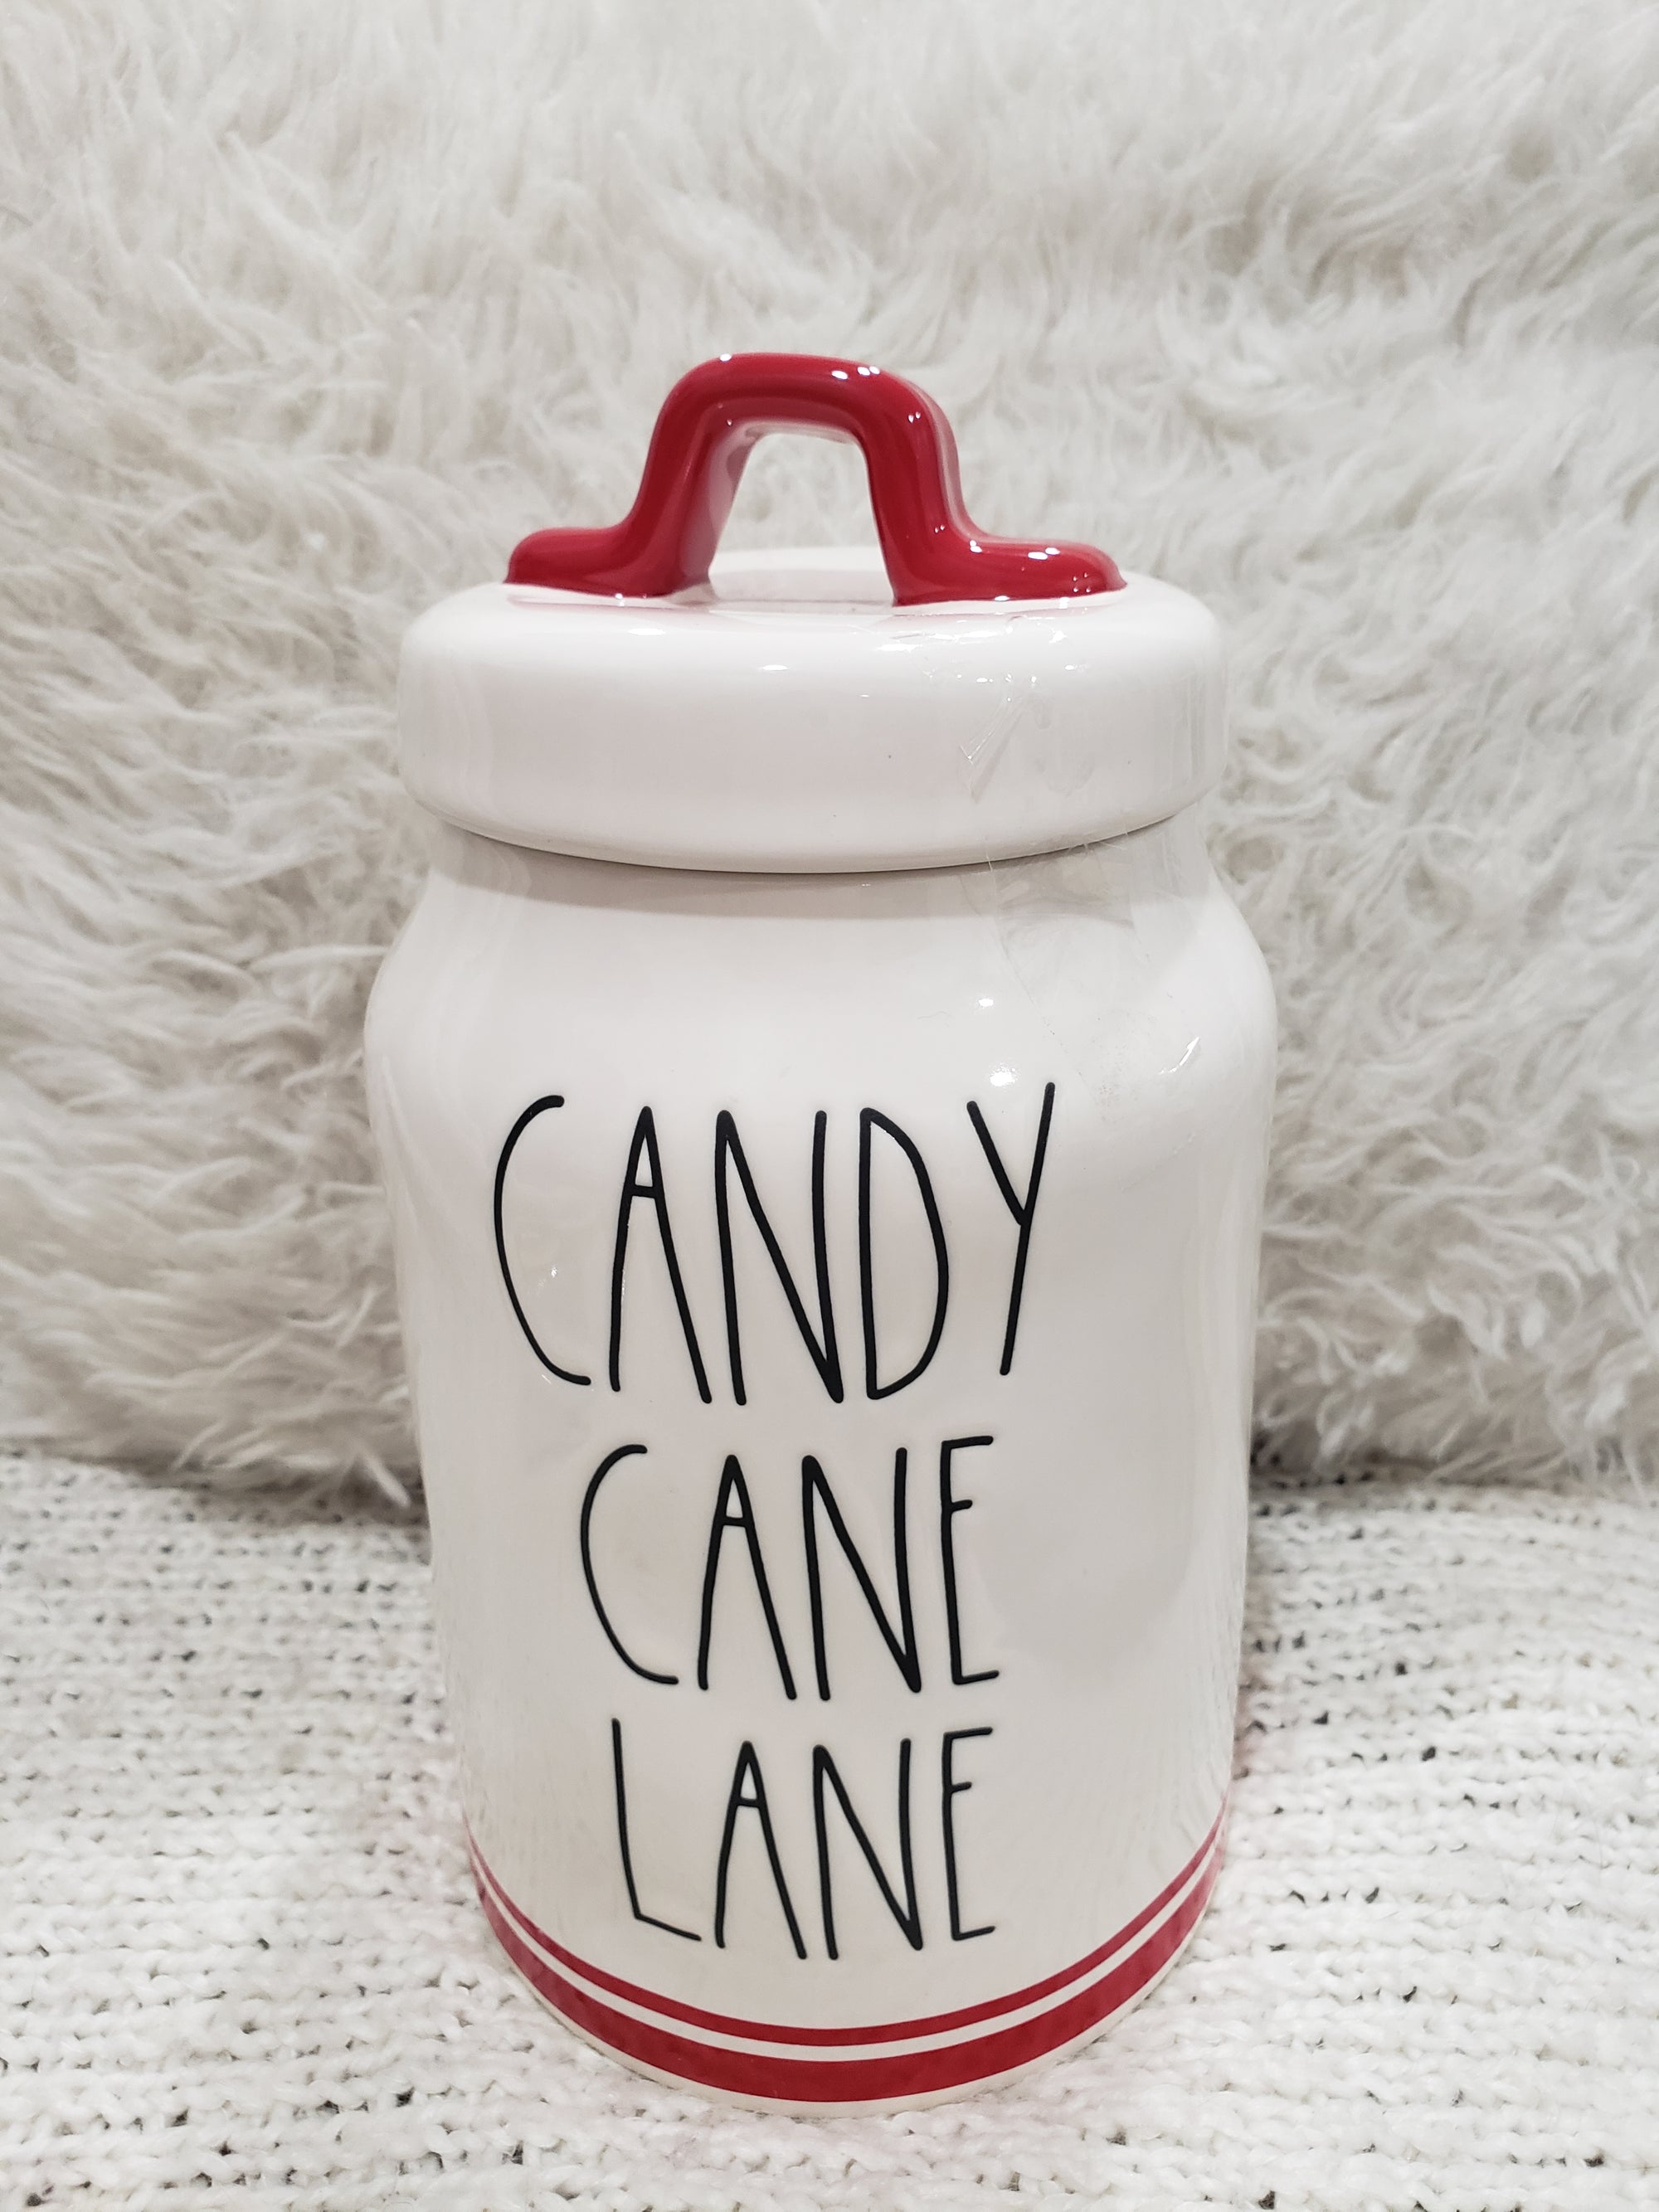 Rae Dunn "Candy Cane Lane" Canister Holiday Collection